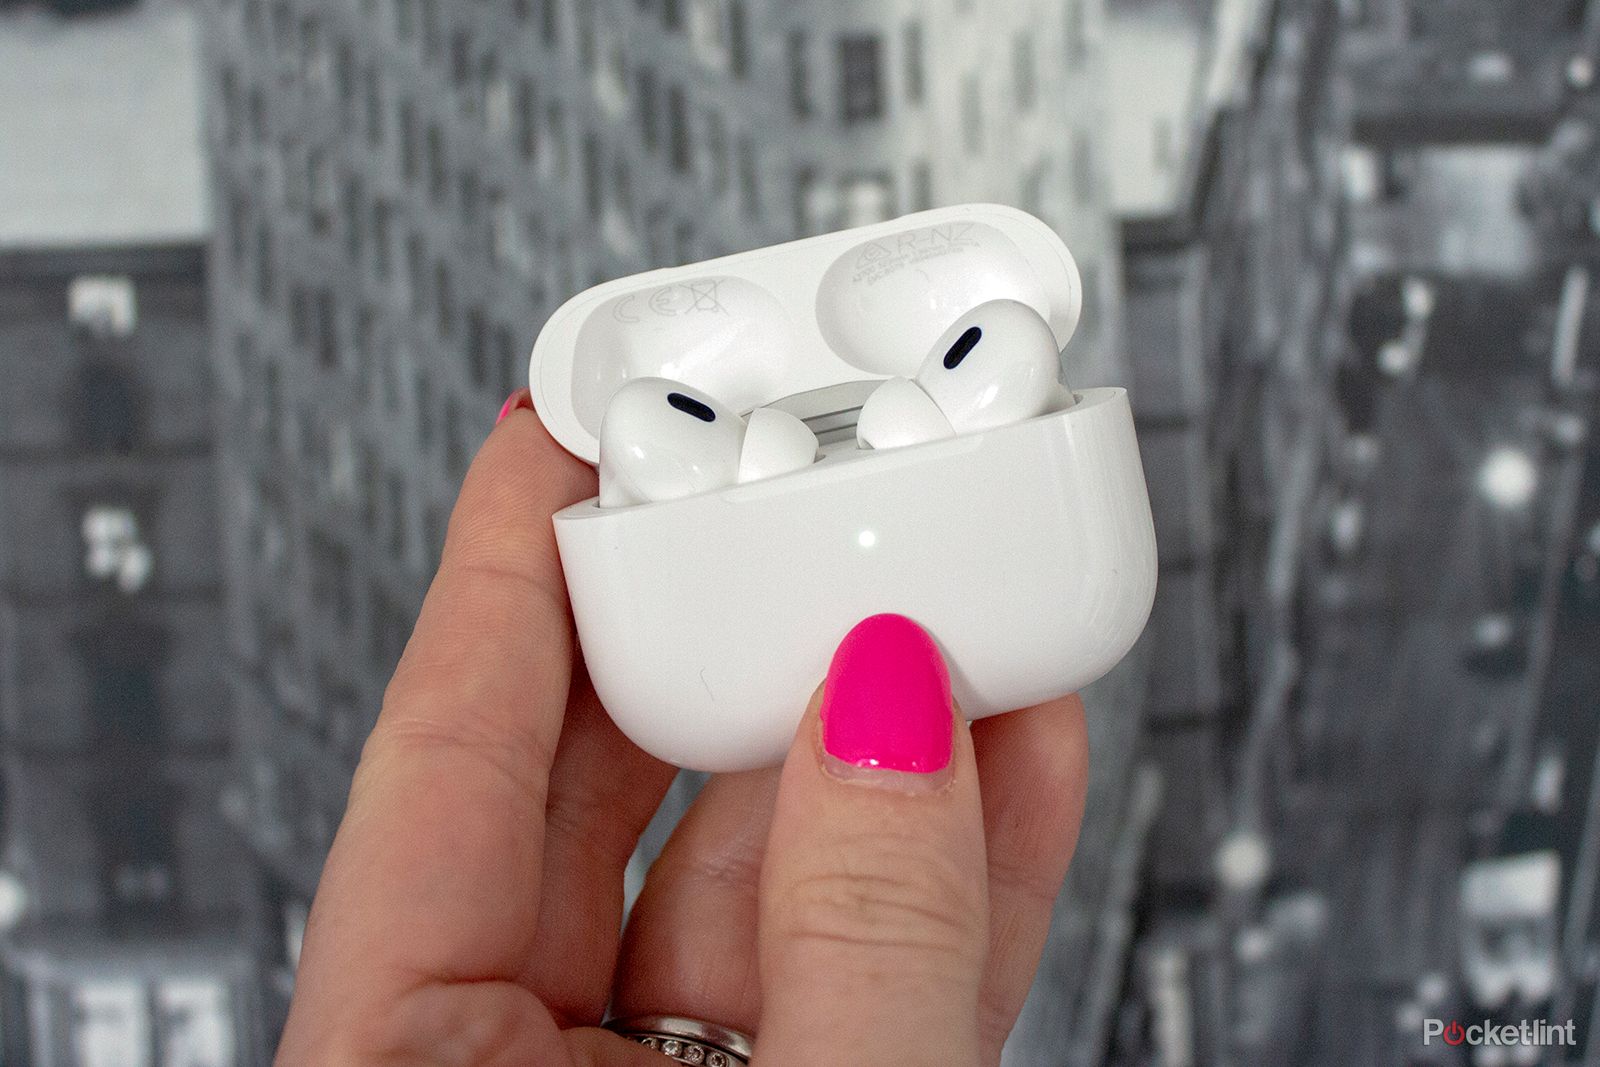 How to disable volume control on Apple Airpods Pro 2 photo 1